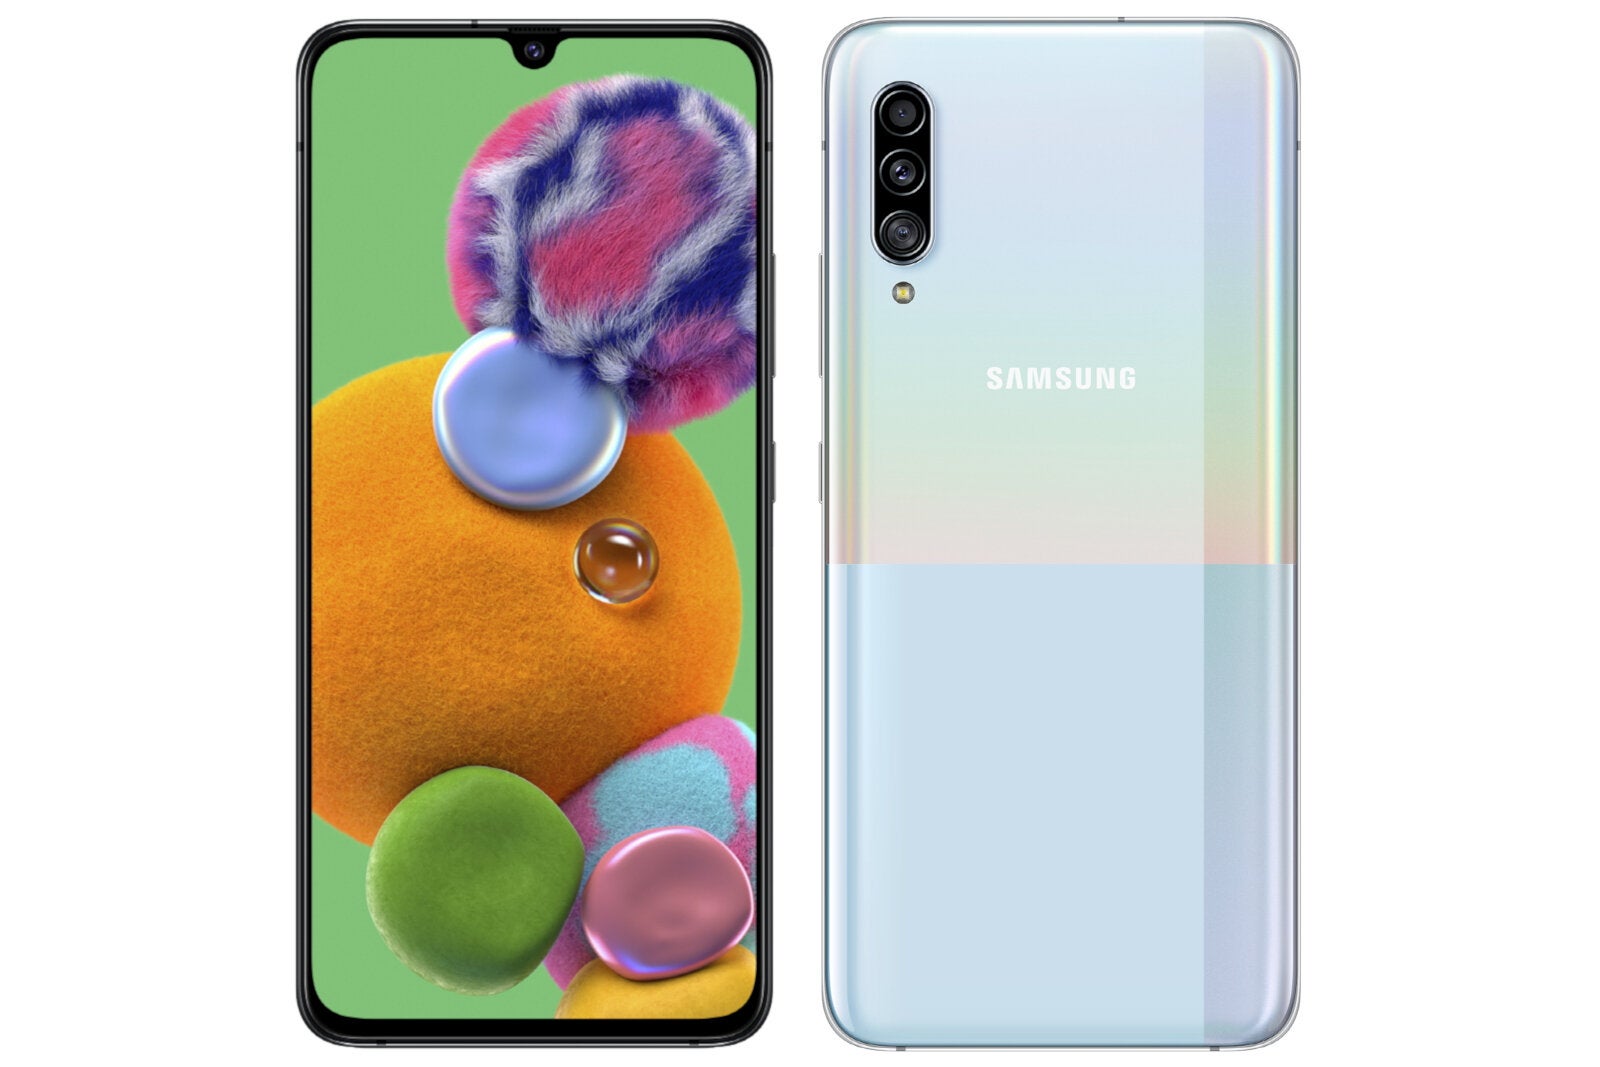 Samsung Galaxy A90 5G - Samsung brings 5G connectivity to the mid-tier with the Galaxy A90 5G